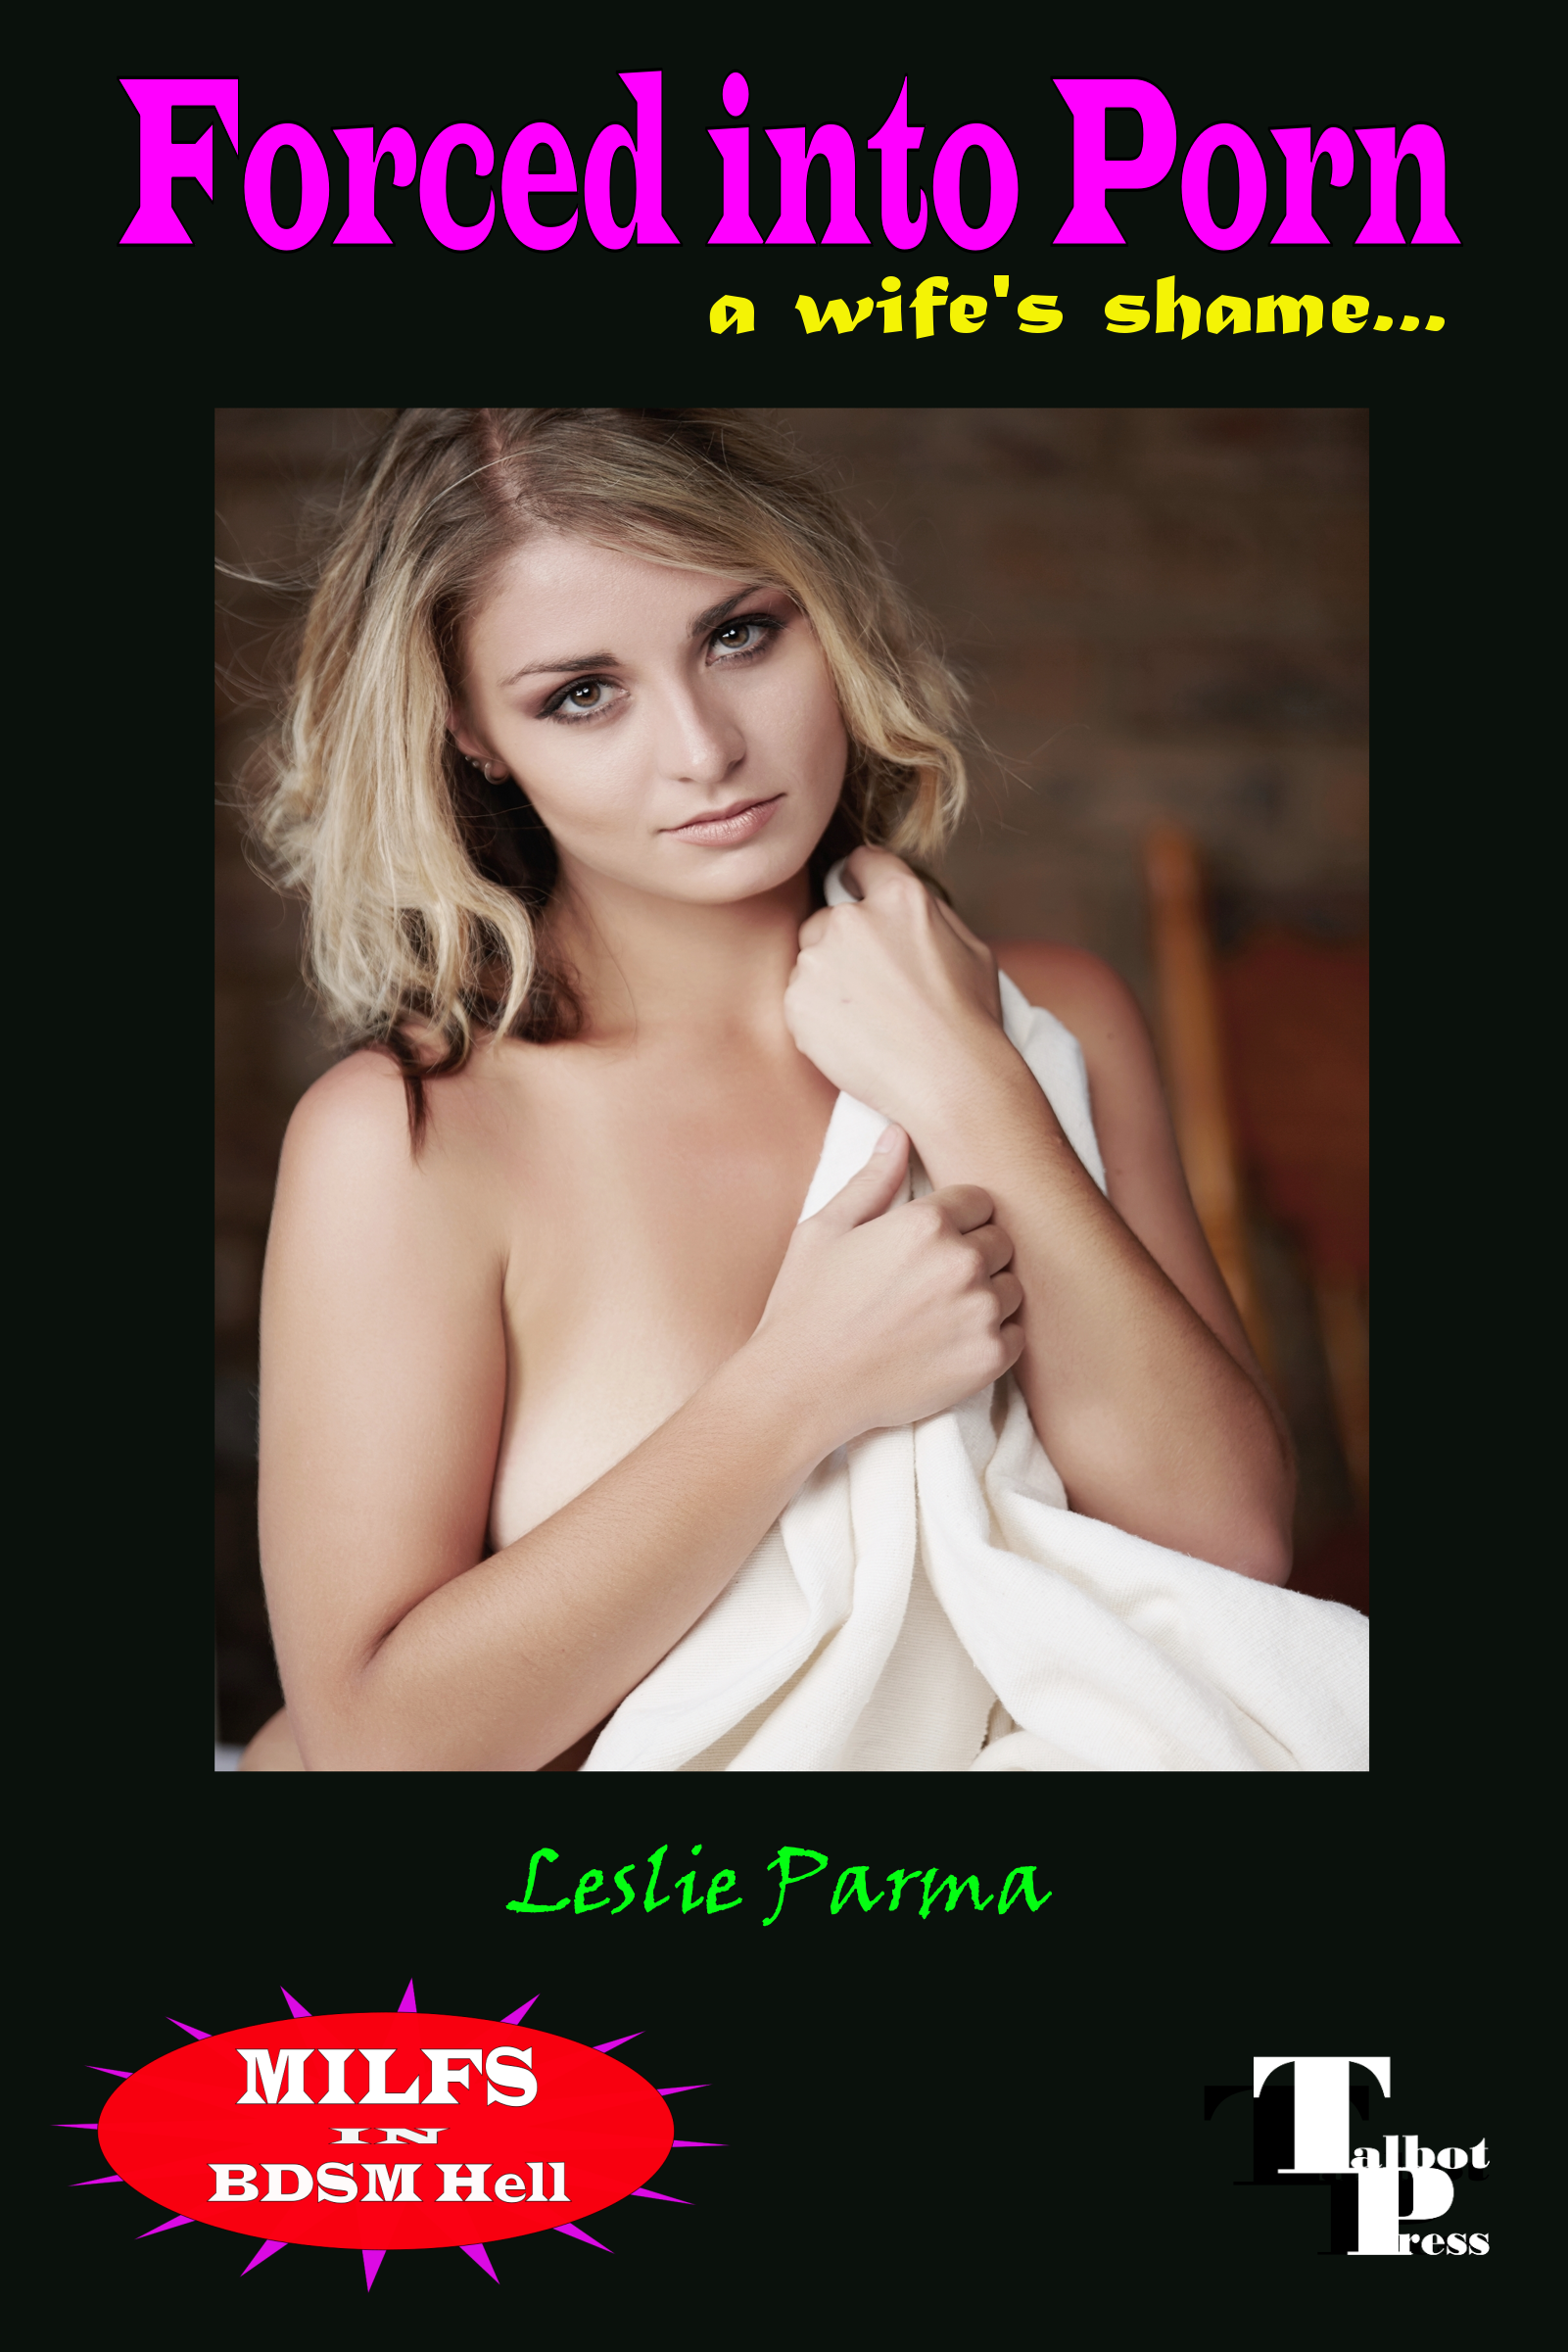 Housewife Blackmail Porn - Forced into Porn, an Ebook by Leslie Parma